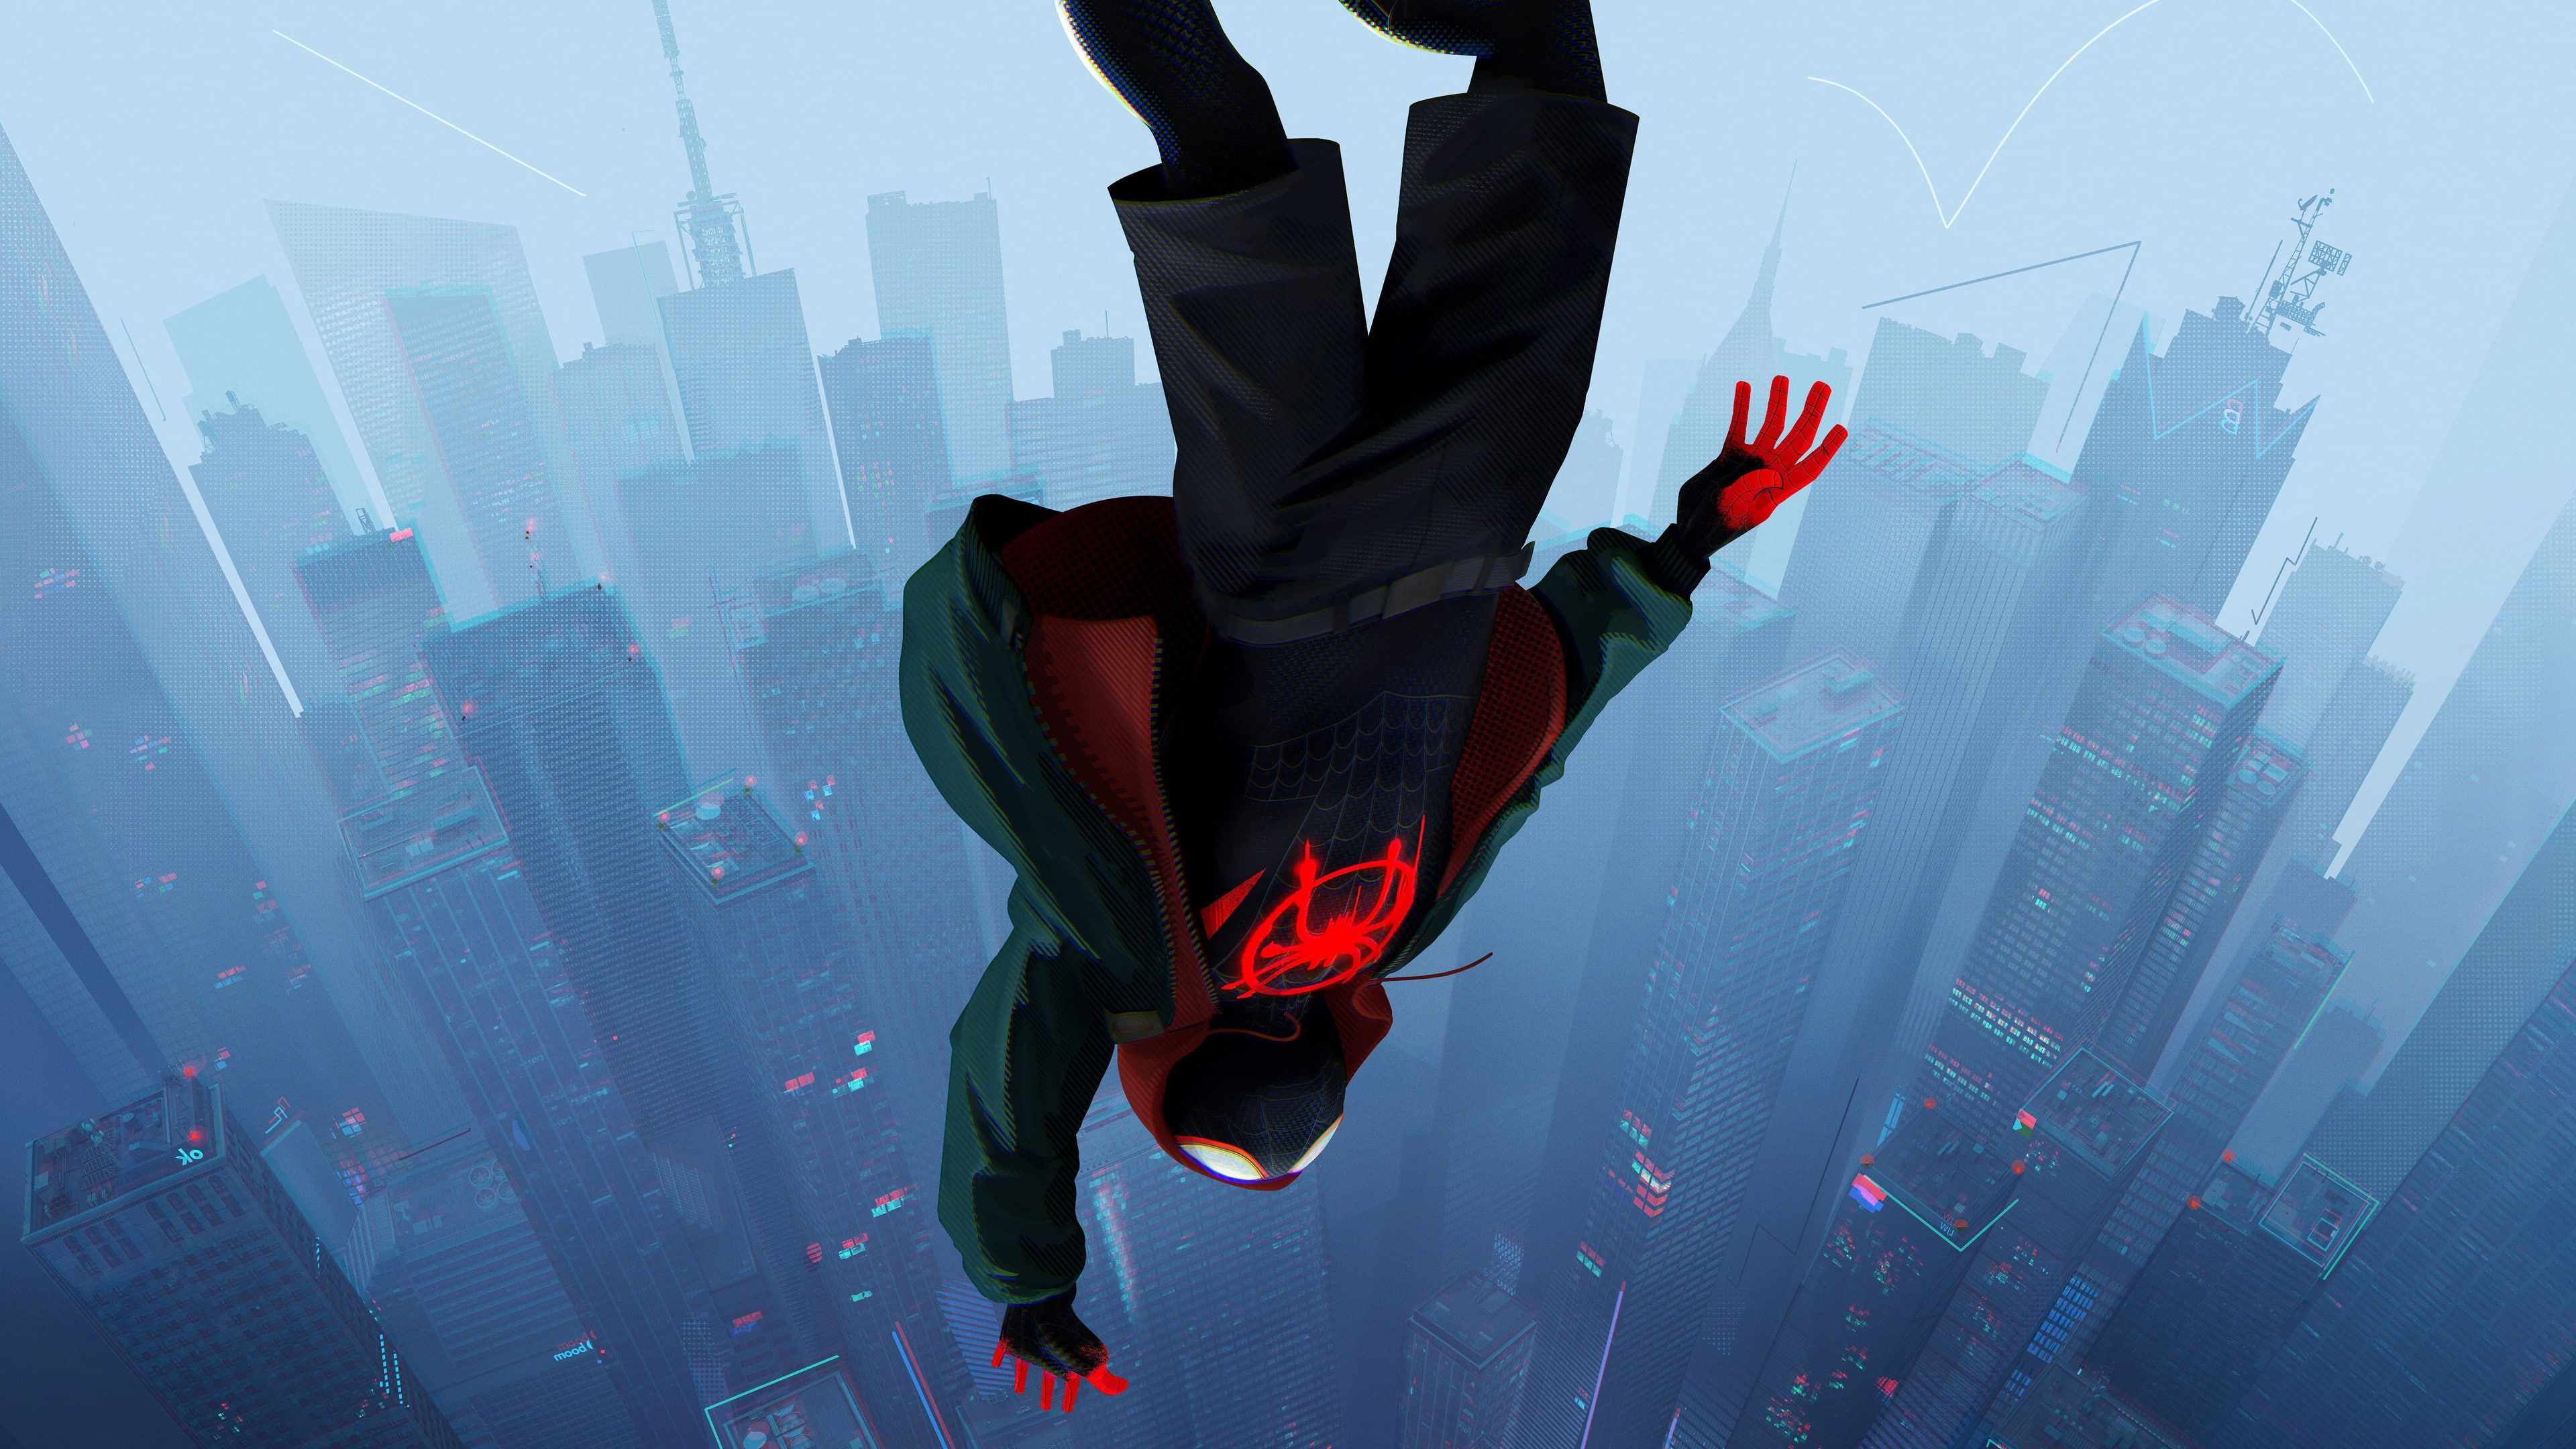 Movies Wallpaper • Into The Spider Verse Wallpaper, Spider Man, Miles Morales, Marvel Comics • Wallpaper For You The Best Wallpaper For Desktop & Mobile 4K Of Wallpaper For Andriod